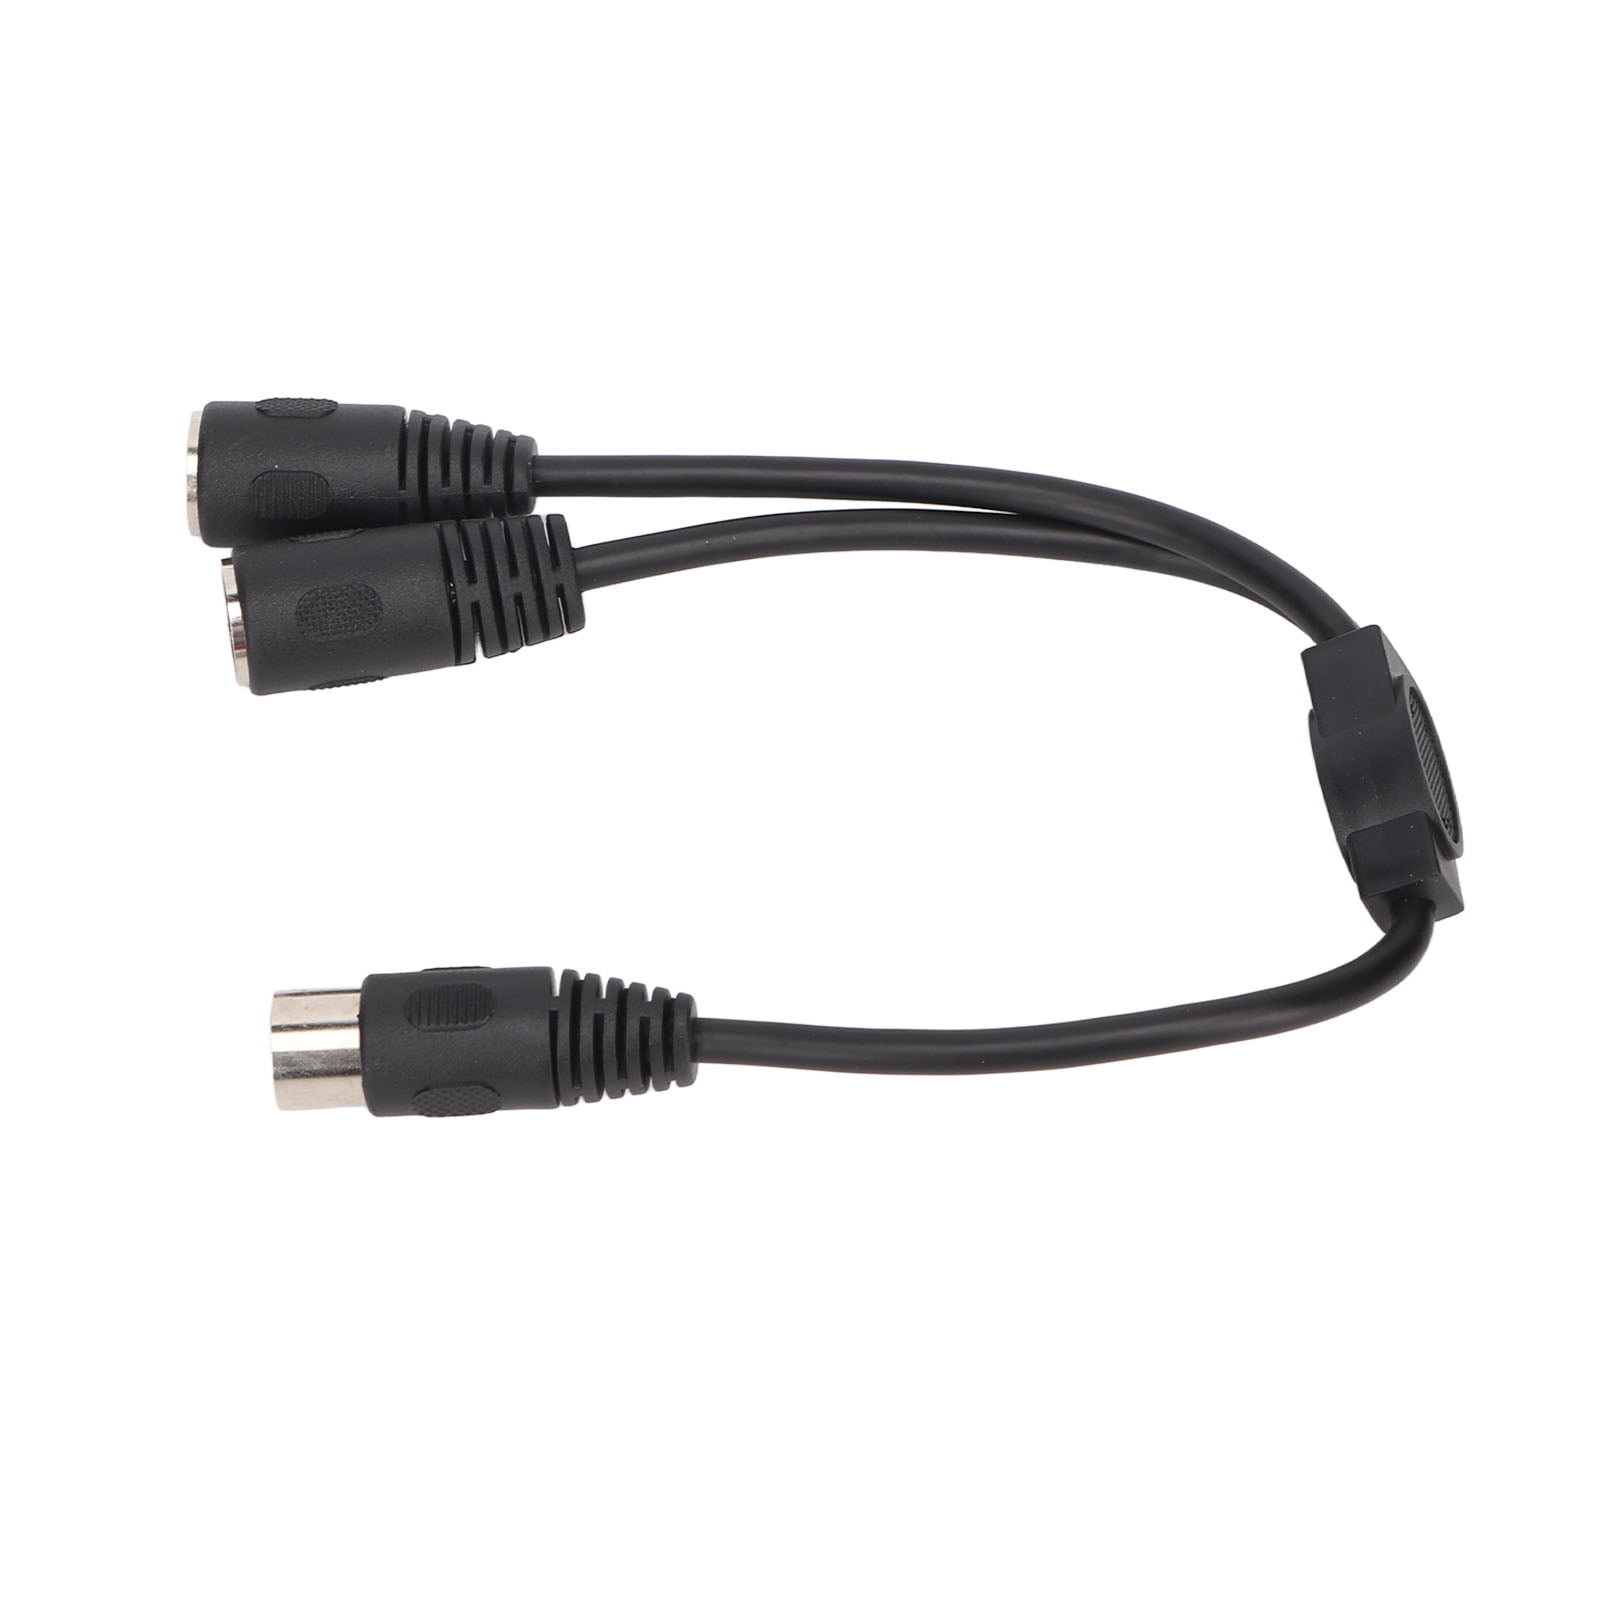 din-7-pin-male-to-2-din-7-pin-female-y-cable-0-98ft-high-accuracy-pvc-7-pin-din-splitter-cable